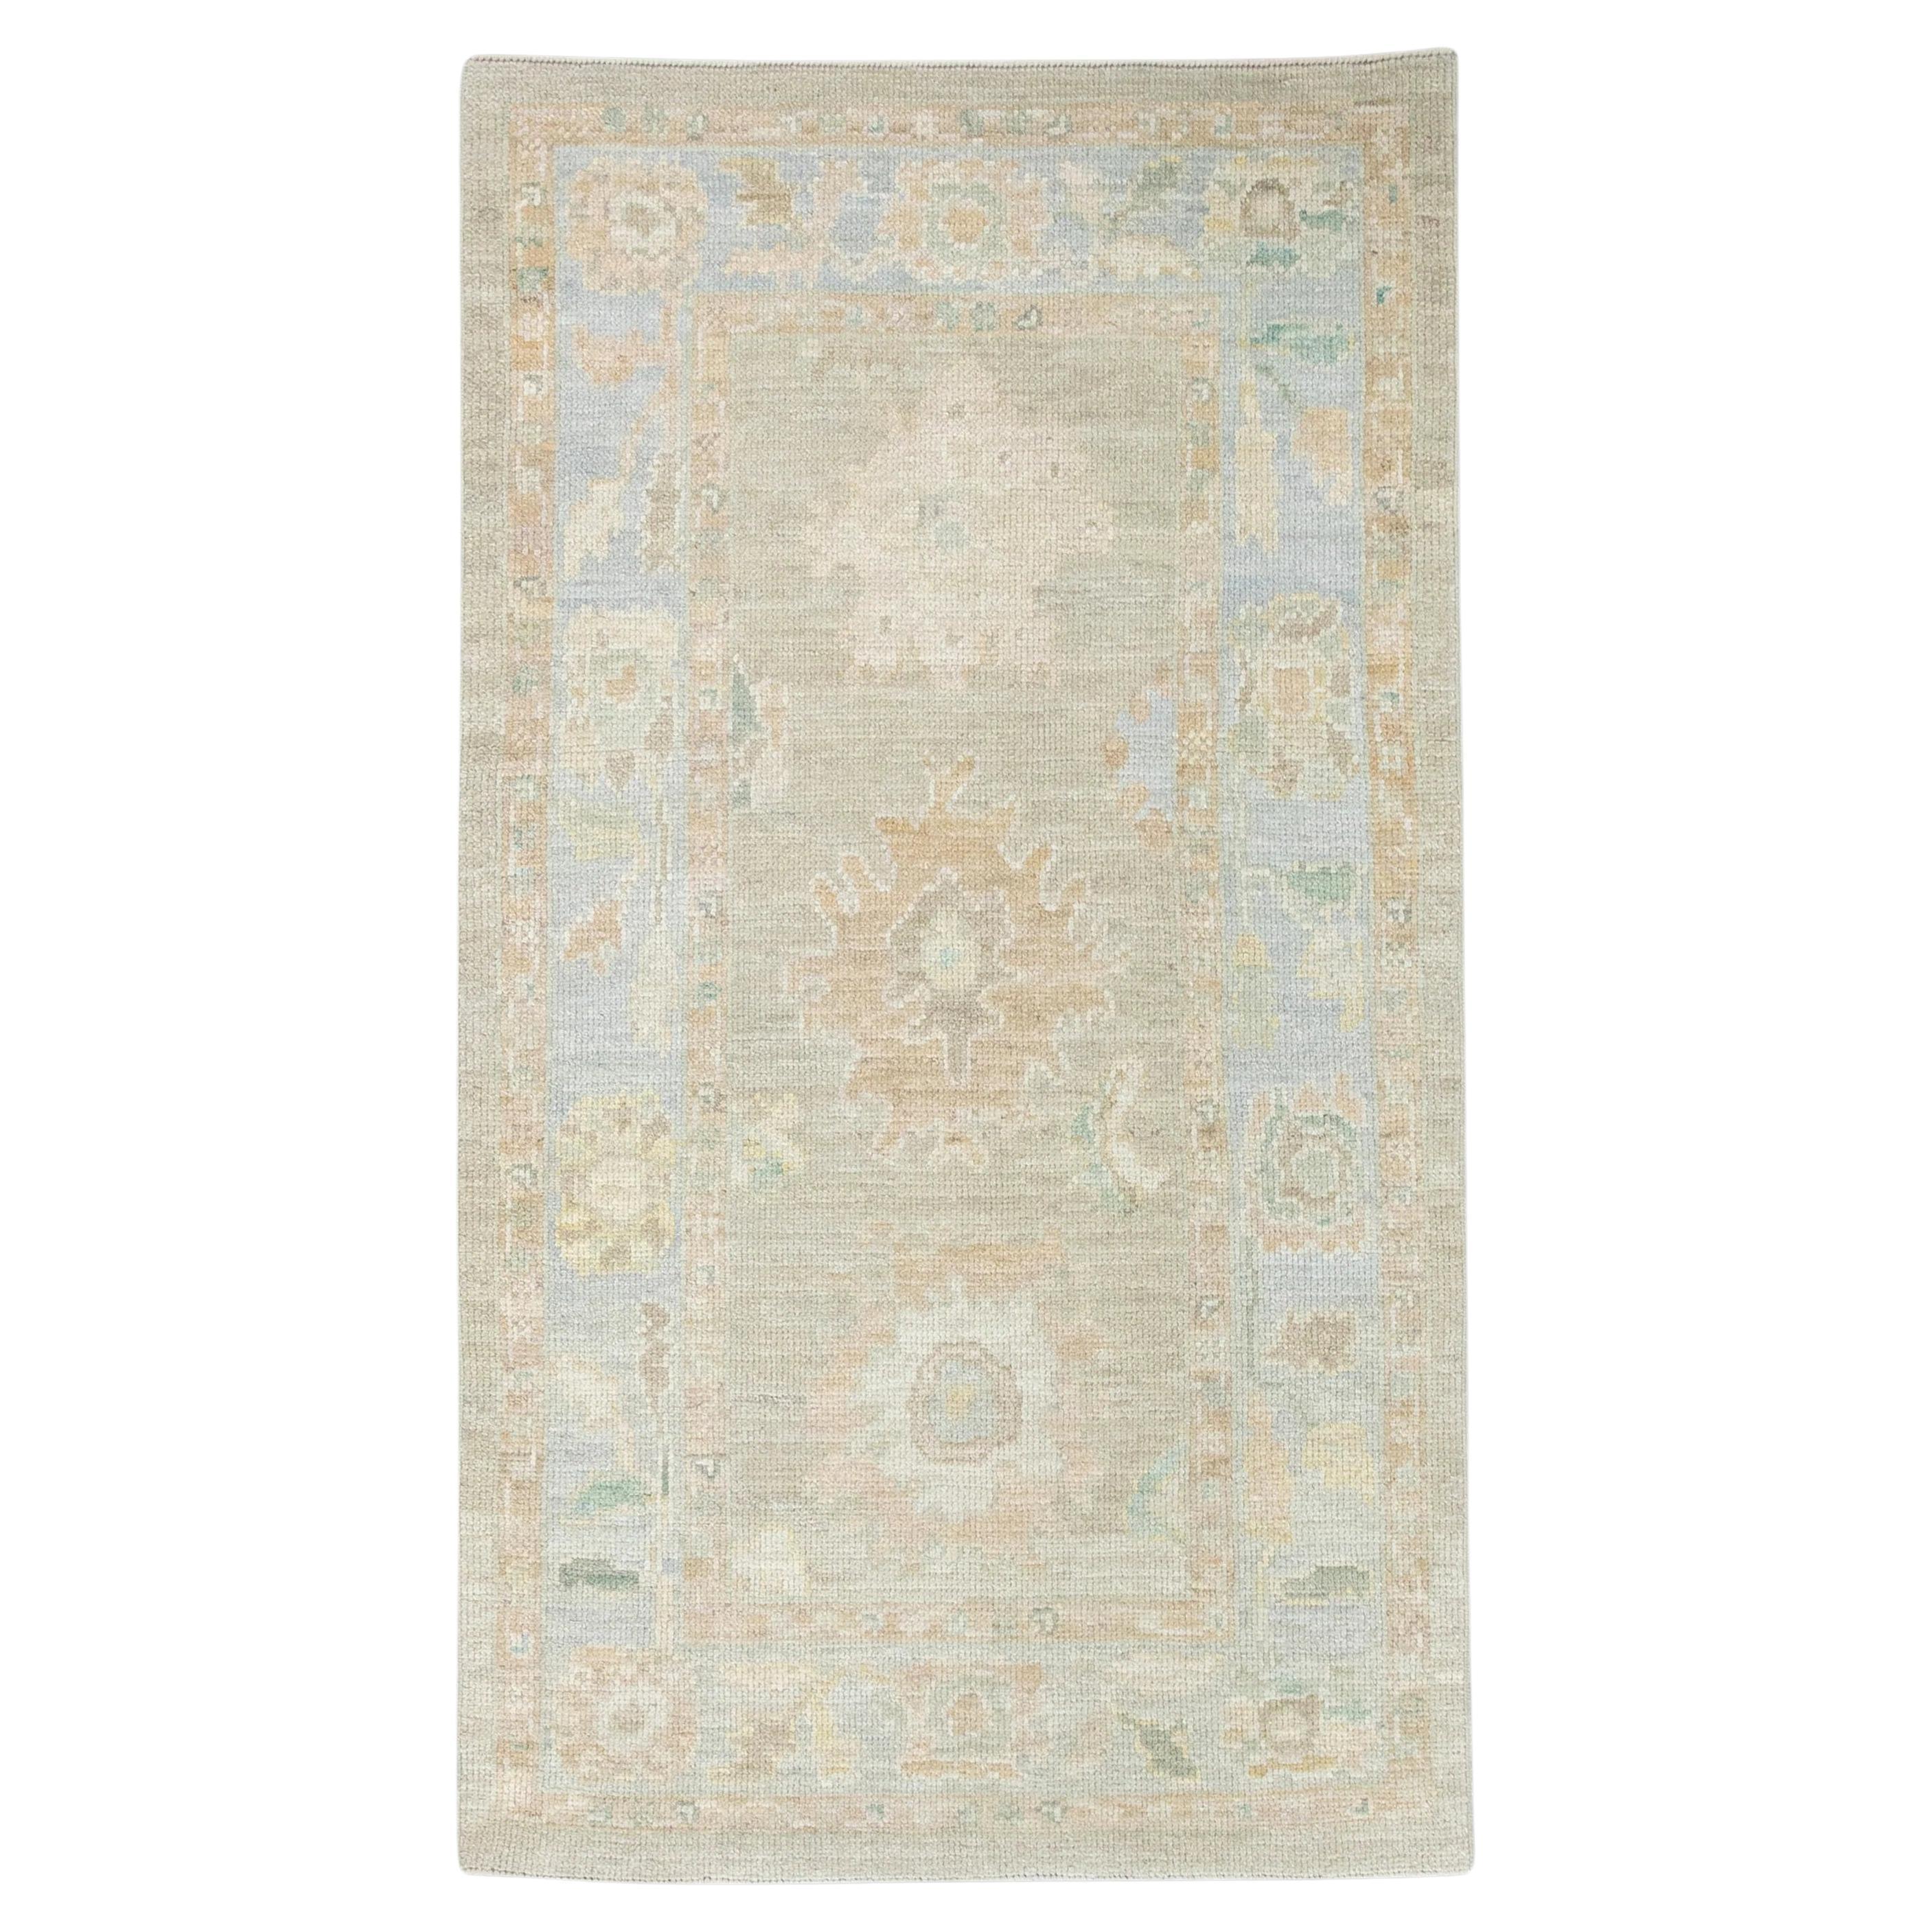 Brown and Blue Floral Design Handwoven Wool Turkish Oushak Rug 3' x 5'5" For Sale